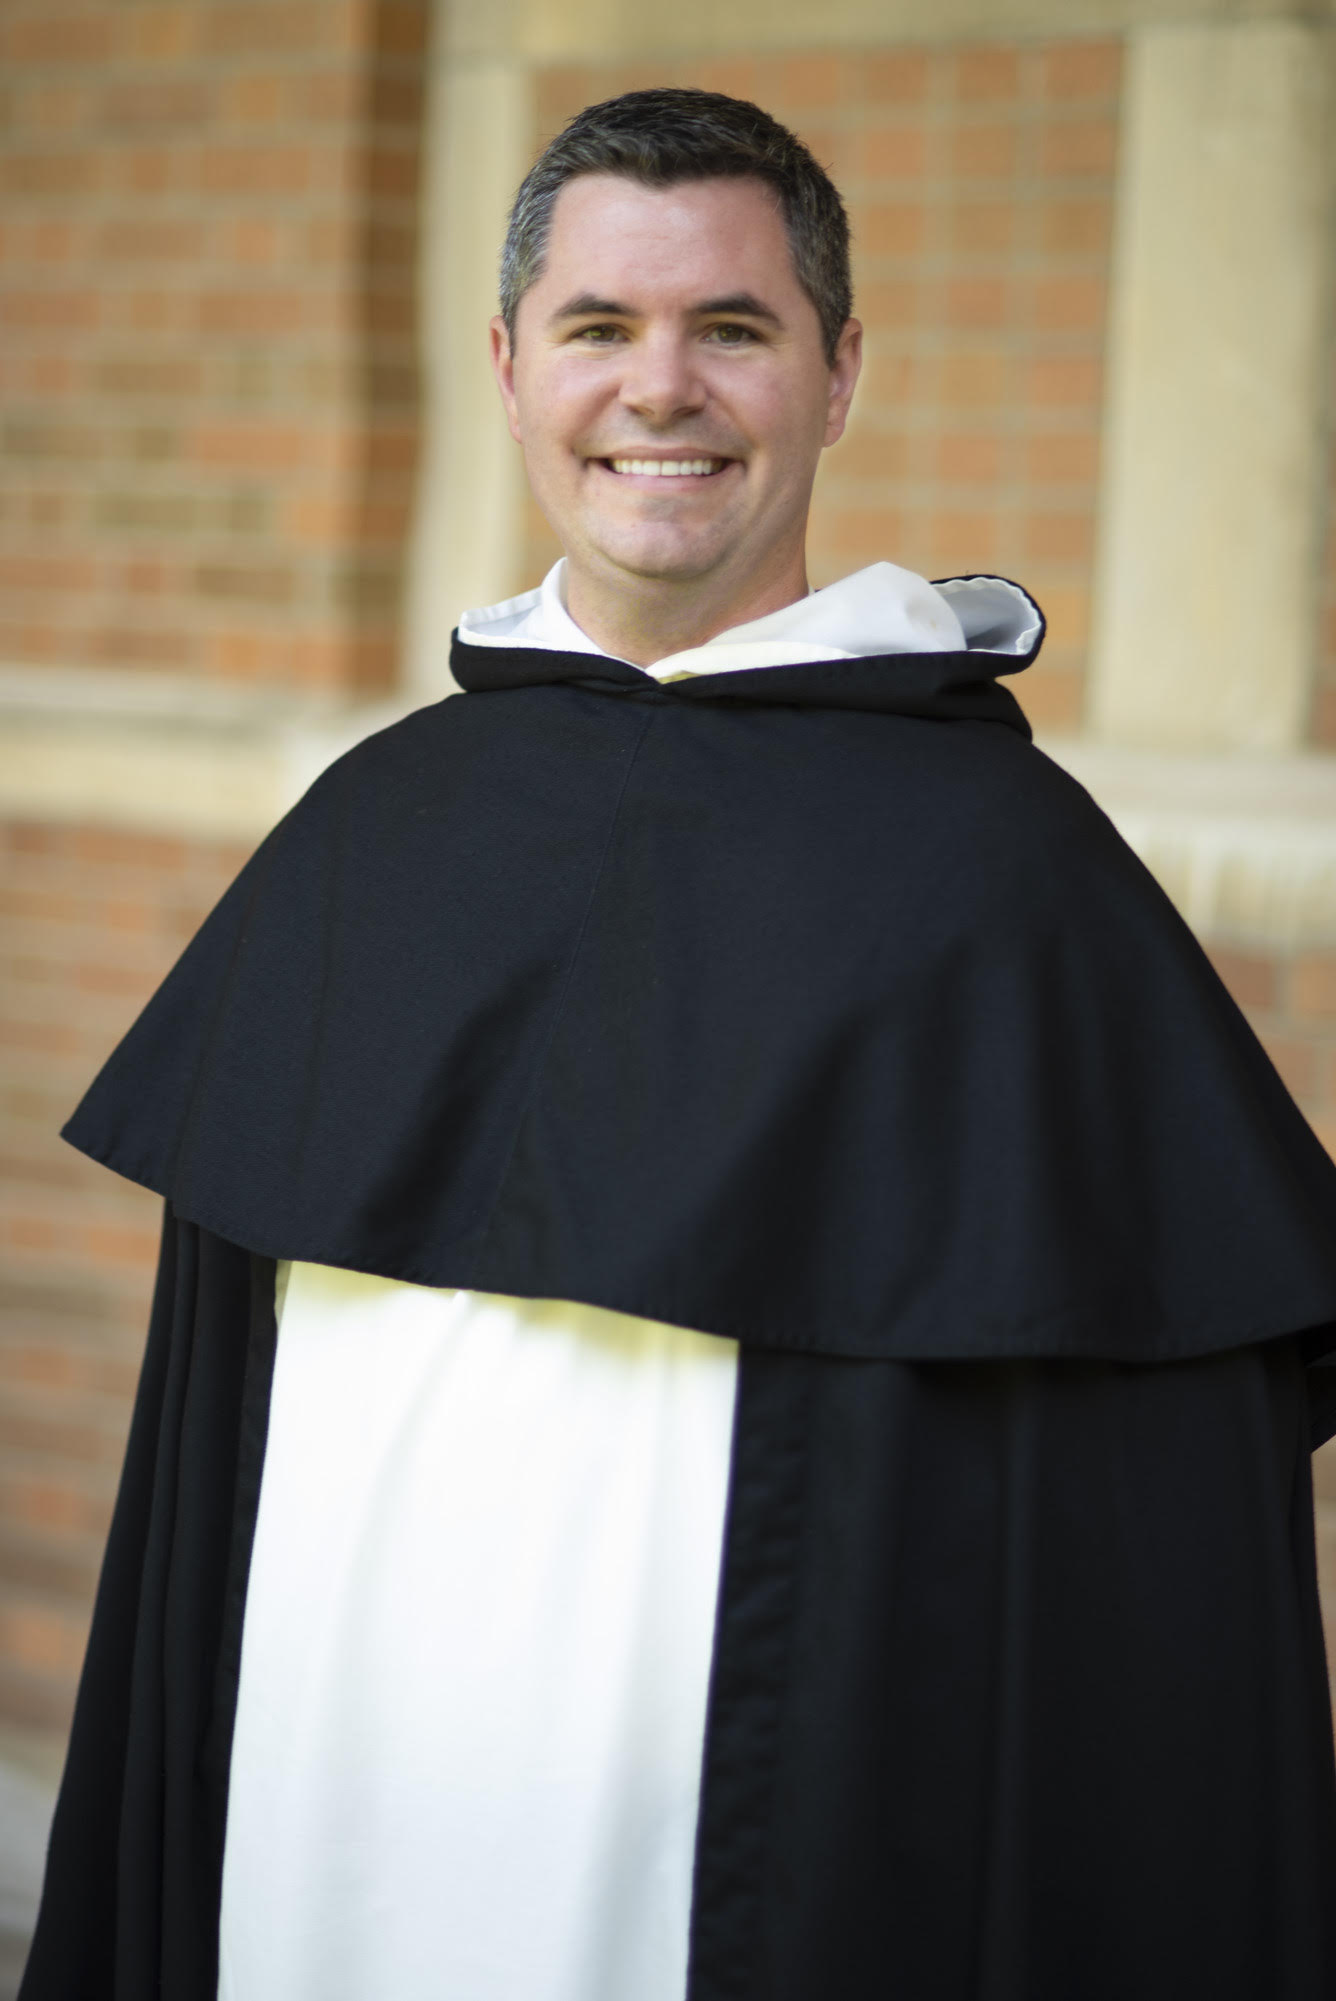 Father Patrick Briscoe photographed in clergy wear 